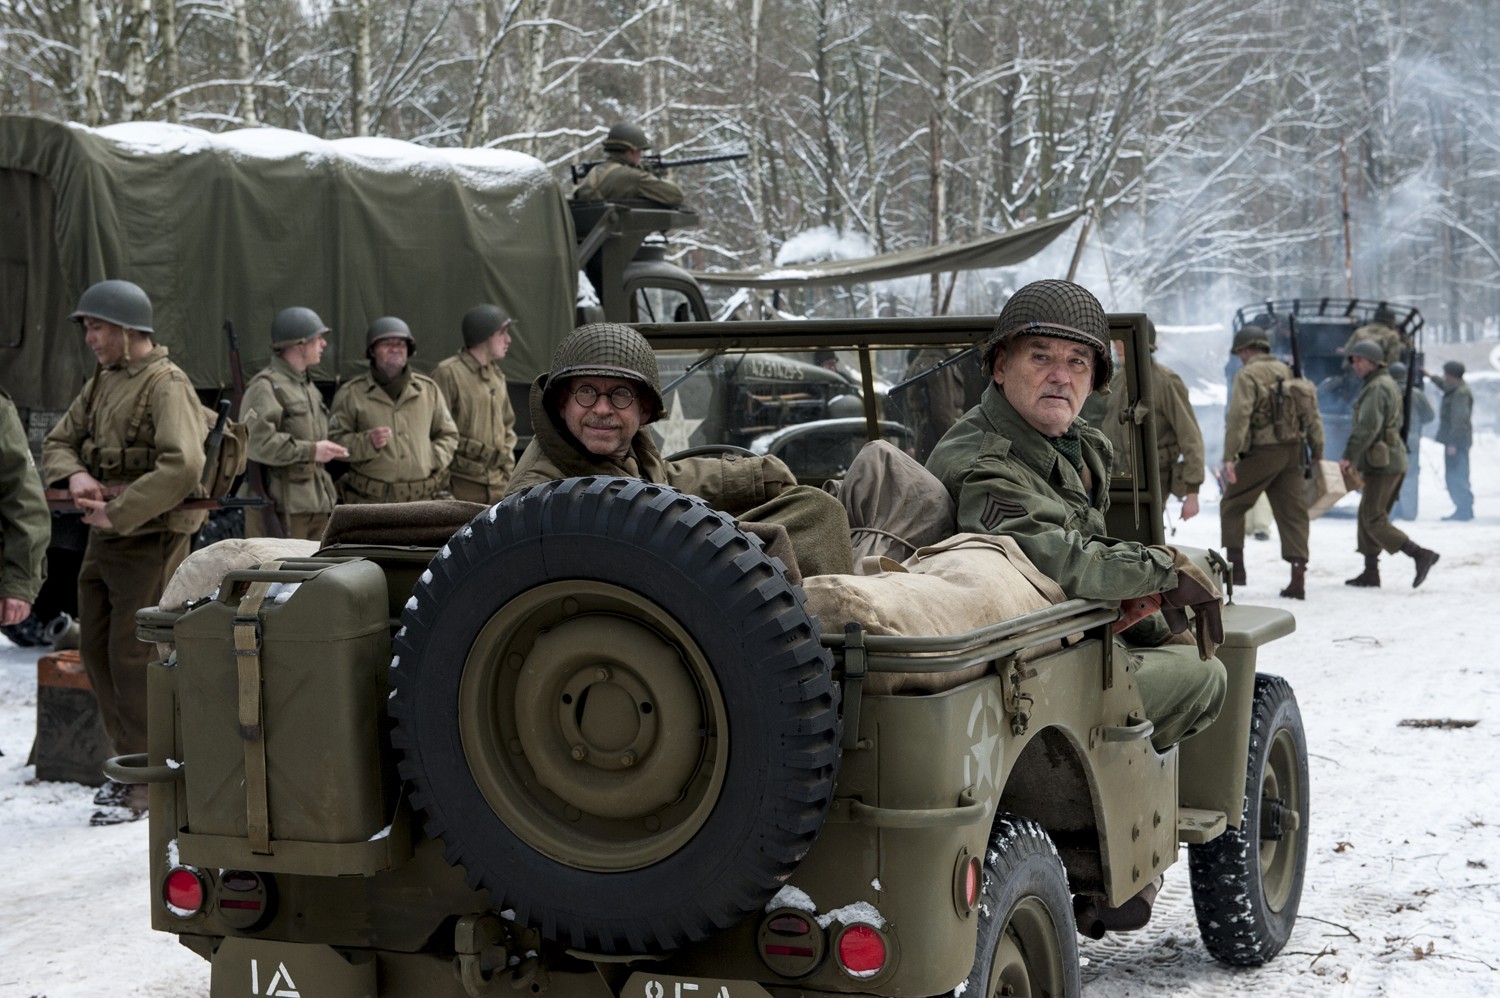 Bob Balaban stars as Preston Savitz and Bill Murray stars as Richard Campbell in Columbia Pictures' The Monuments Men (2014)